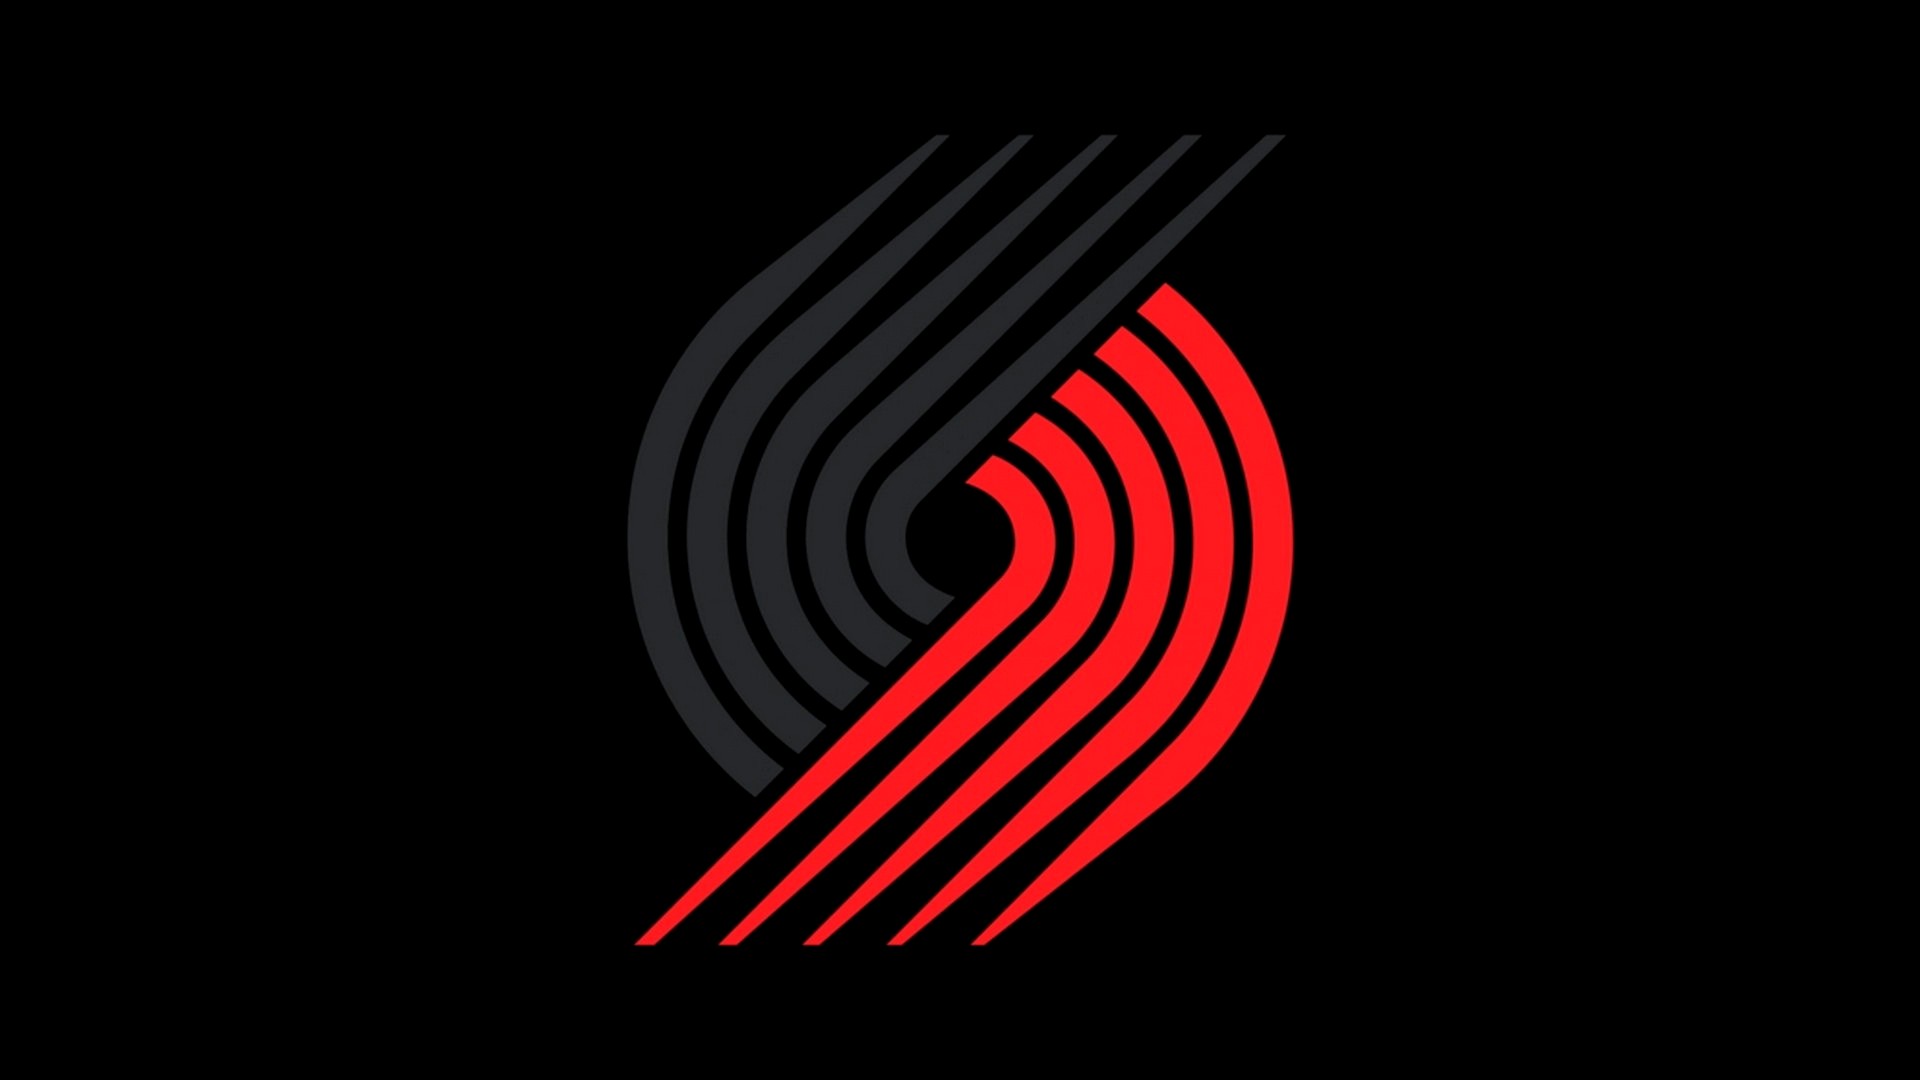 Wallpaper Desktop Portland Trail Blazers HD with high-resolution 1920x1080 pixel. You can use this wallpaper for your Desktop Computer Backgrounds, Windows or Mac Screensavers, iPhone Lock screen, Tablet or Android and another Mobile Phone device